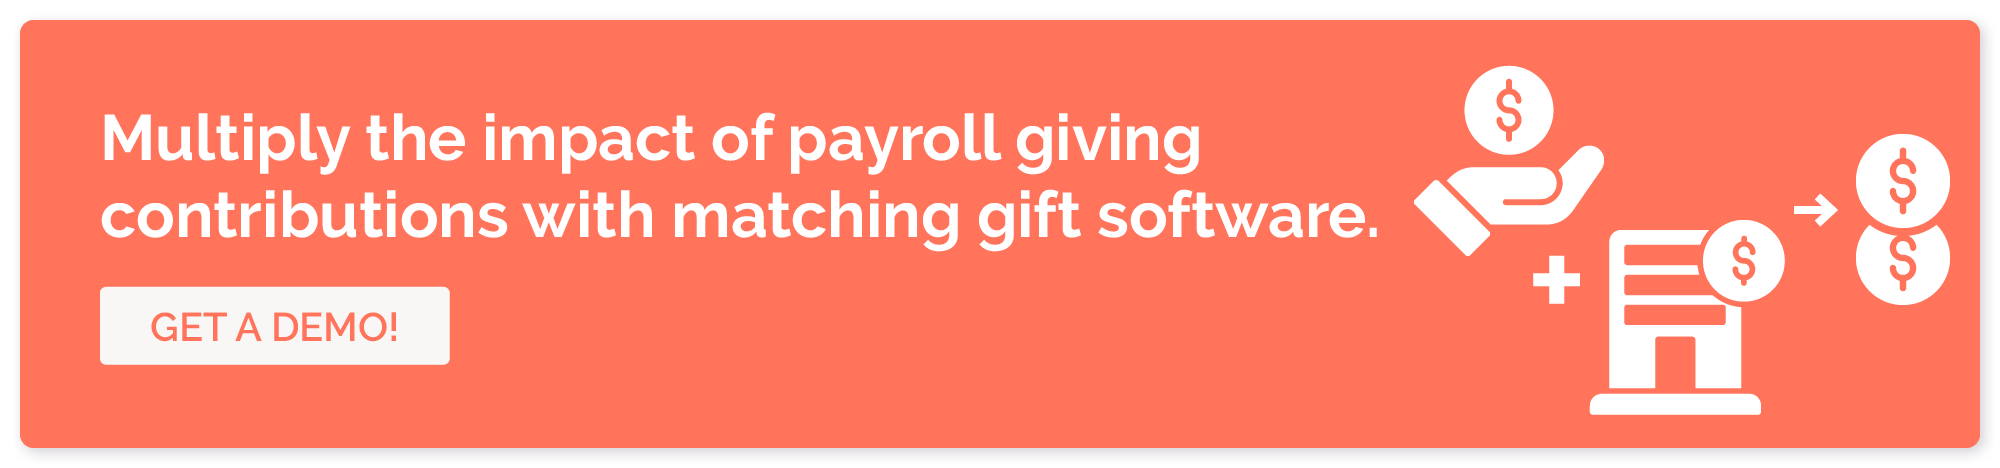 Get a demo of our matching gift software to multiply the impact of payroll giving.